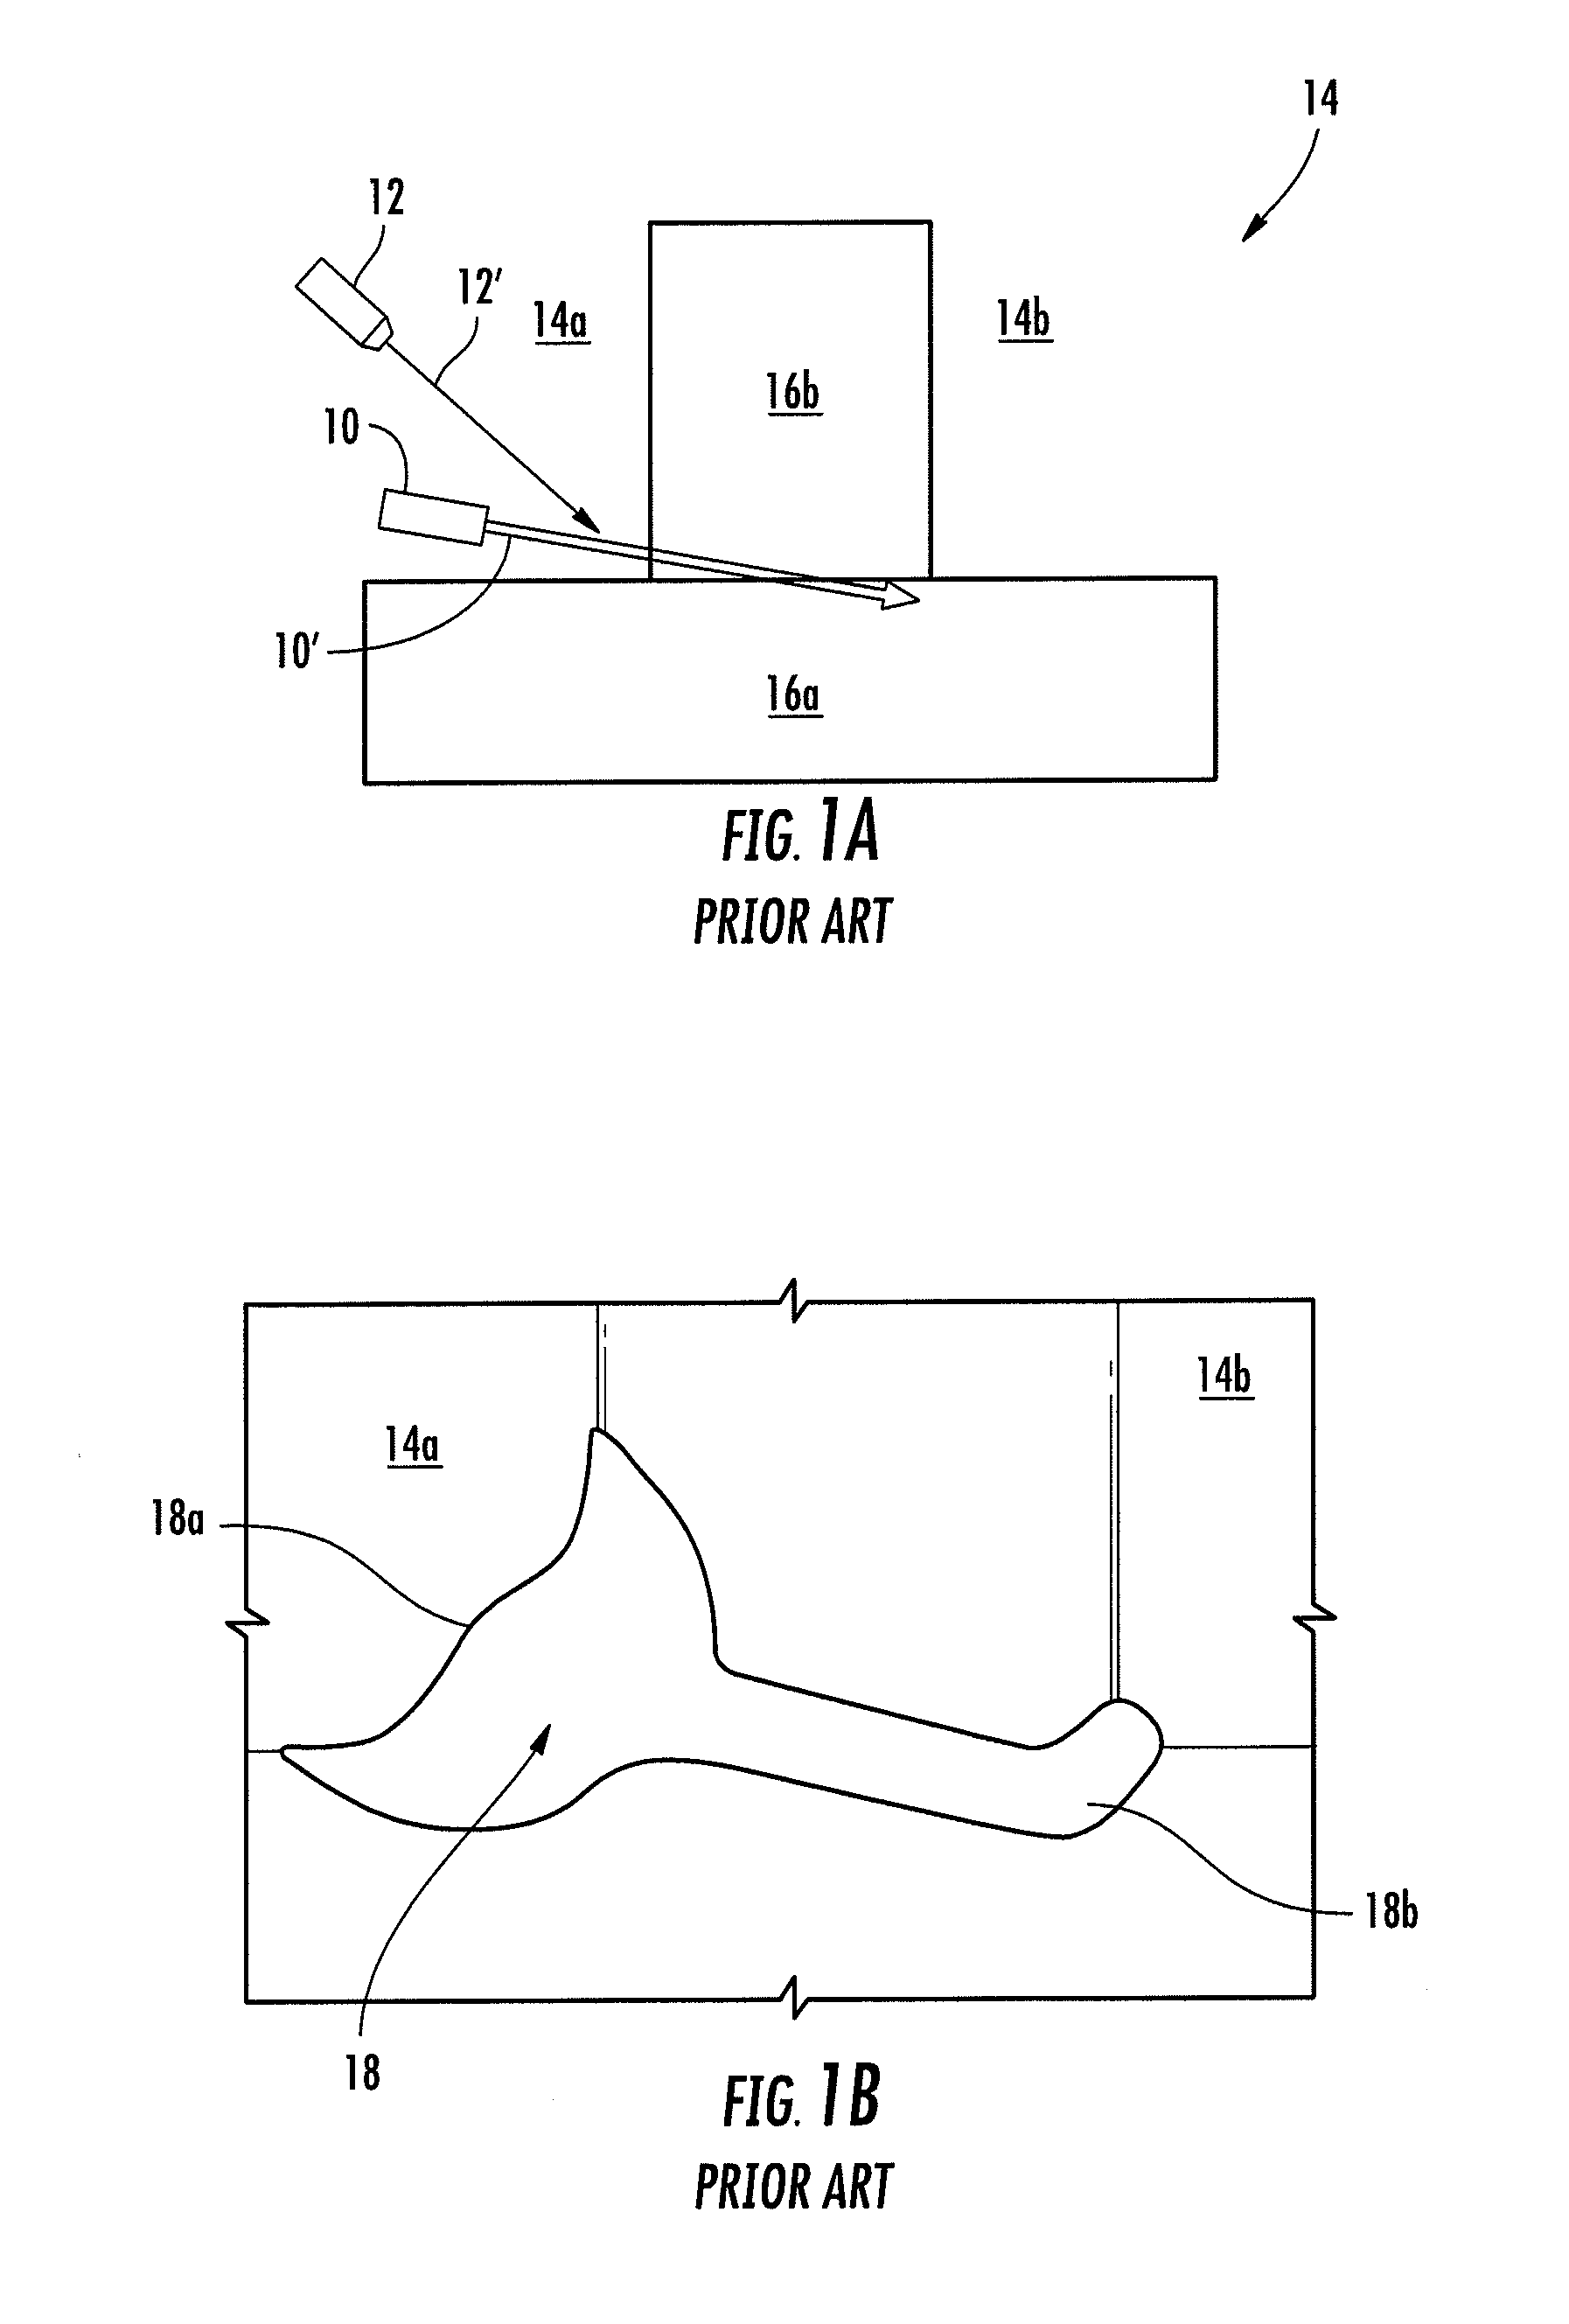 Hybrid welding with multiple heat sources